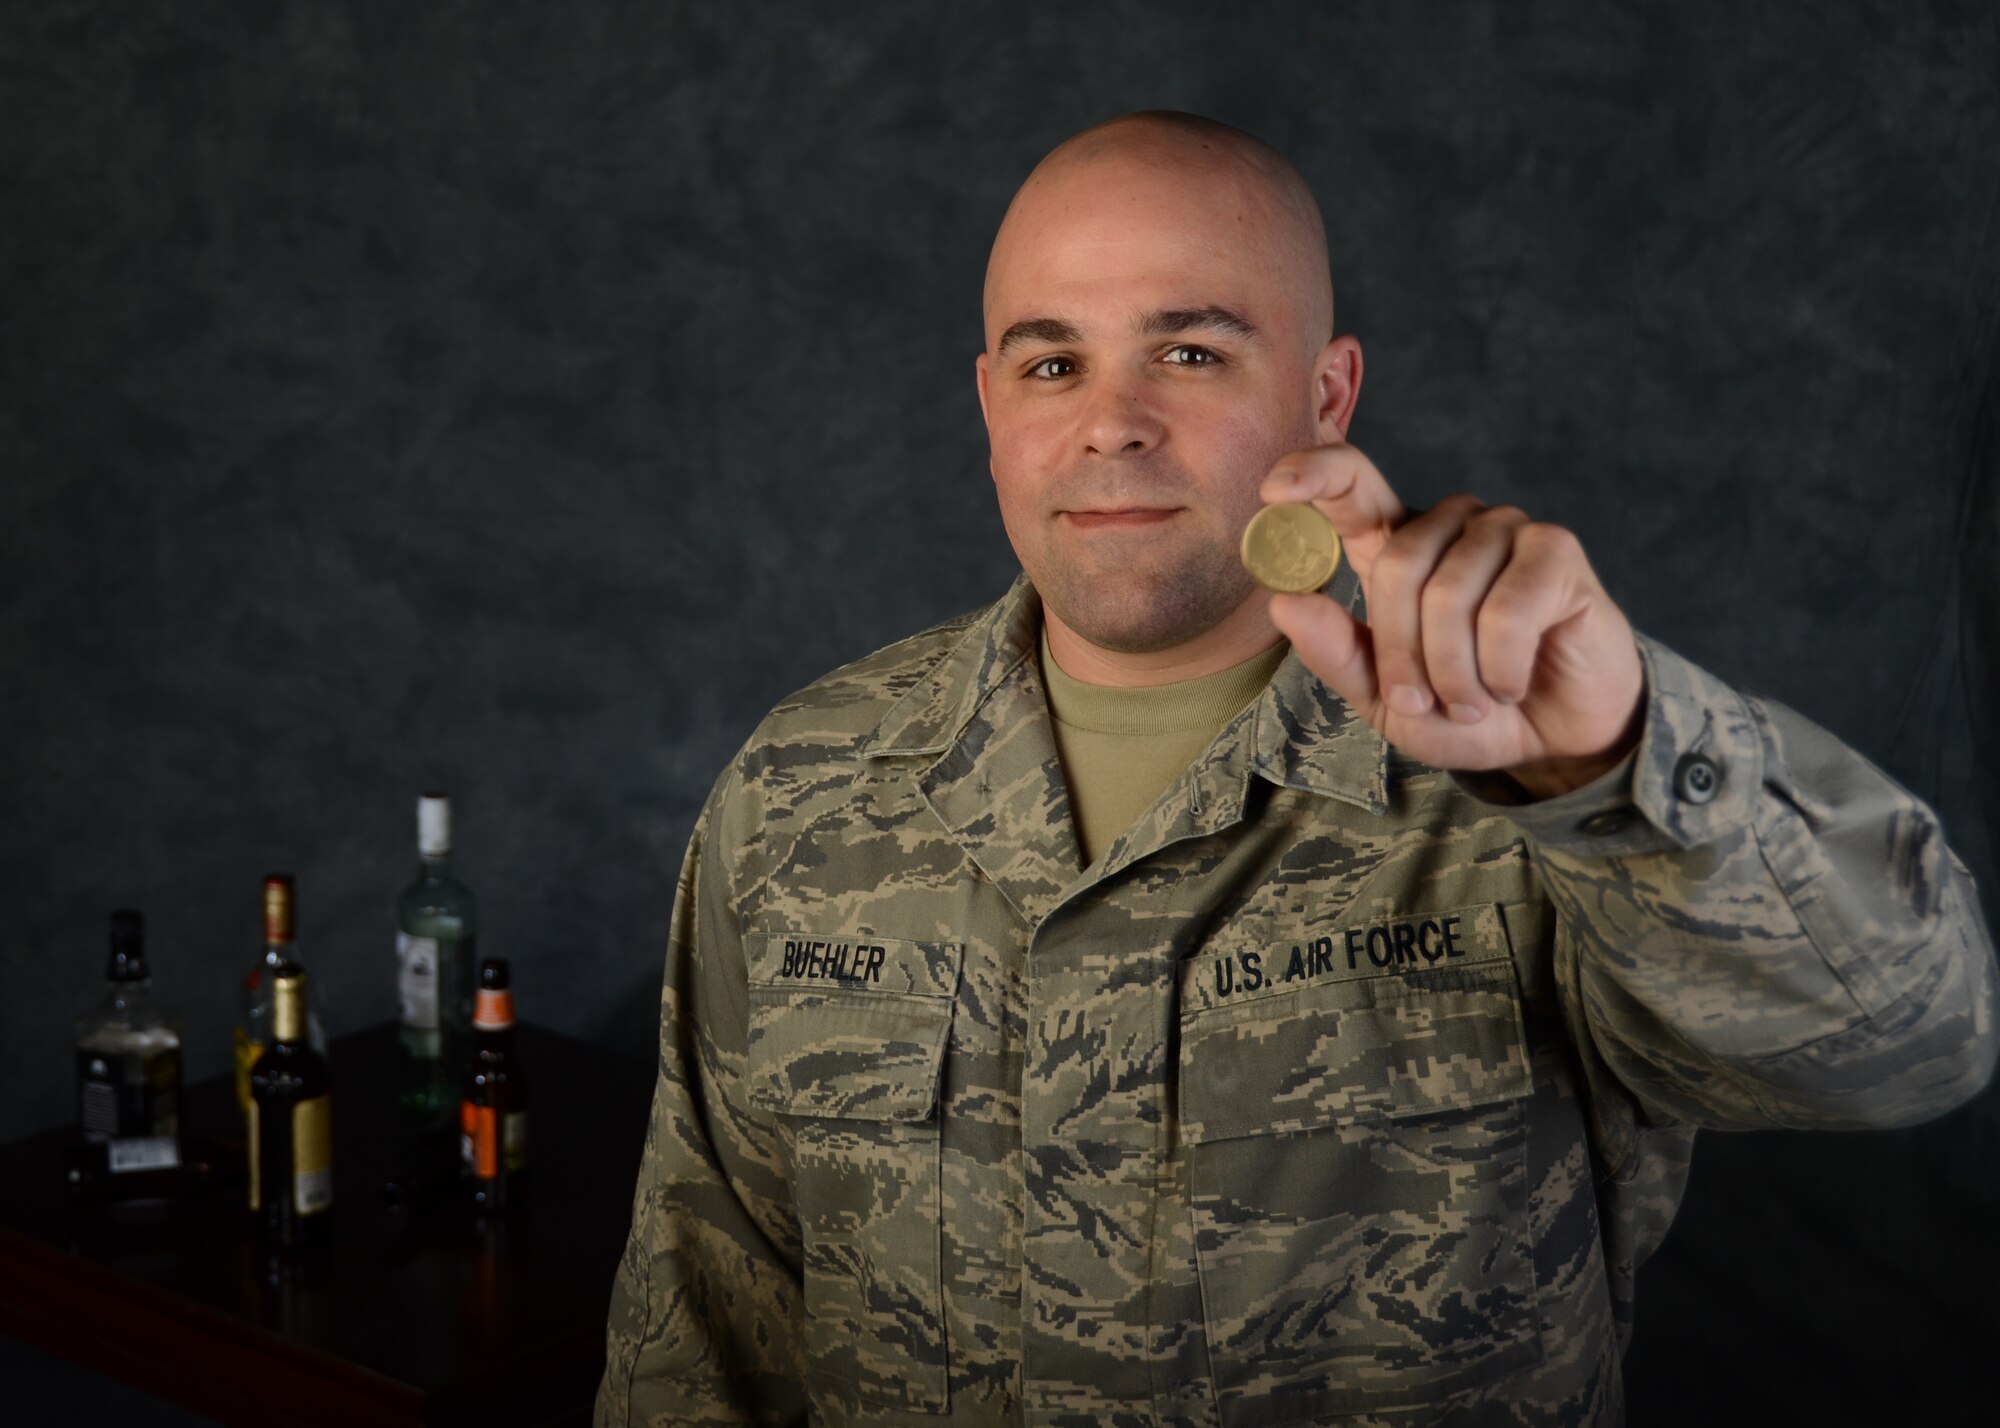 Tech. Sgt. Jeremy Buehler, maintainer with the 131st Bomb Wing at Whiteman Air Force Base, Missouri, holds his sobriety coin that reads One Day At A Time Apr. 8, 2016. Buehler demonstrates mental resilience as he has overcome alcoholism and depression by using psychological and mental health resources offered by the National Guard. Mental fitness is one of four pillars of Comprehensive Airman Fitness in AFI 90-506. Buehler credits his supervisors with saving his career. But, Buehler isn't the only one facing this issue. Suicide is one of the most urgent problems facing the Department of Defense and society. Among the reserves and National Guard, 88 Army, Navy, Air Force and Marine reservists died by suicide in 2015, while 100 Army National Guard members and 21 Air National Guardsmen killed themselves, according to a recent DoD report. The Guard has ongoing education and training programs, as well as psychological health professionals who help create a protective and resilient culture within the wings. (U.S. Air National Guard photo by Airman 1st Class Halley Burgess/RELEASED)